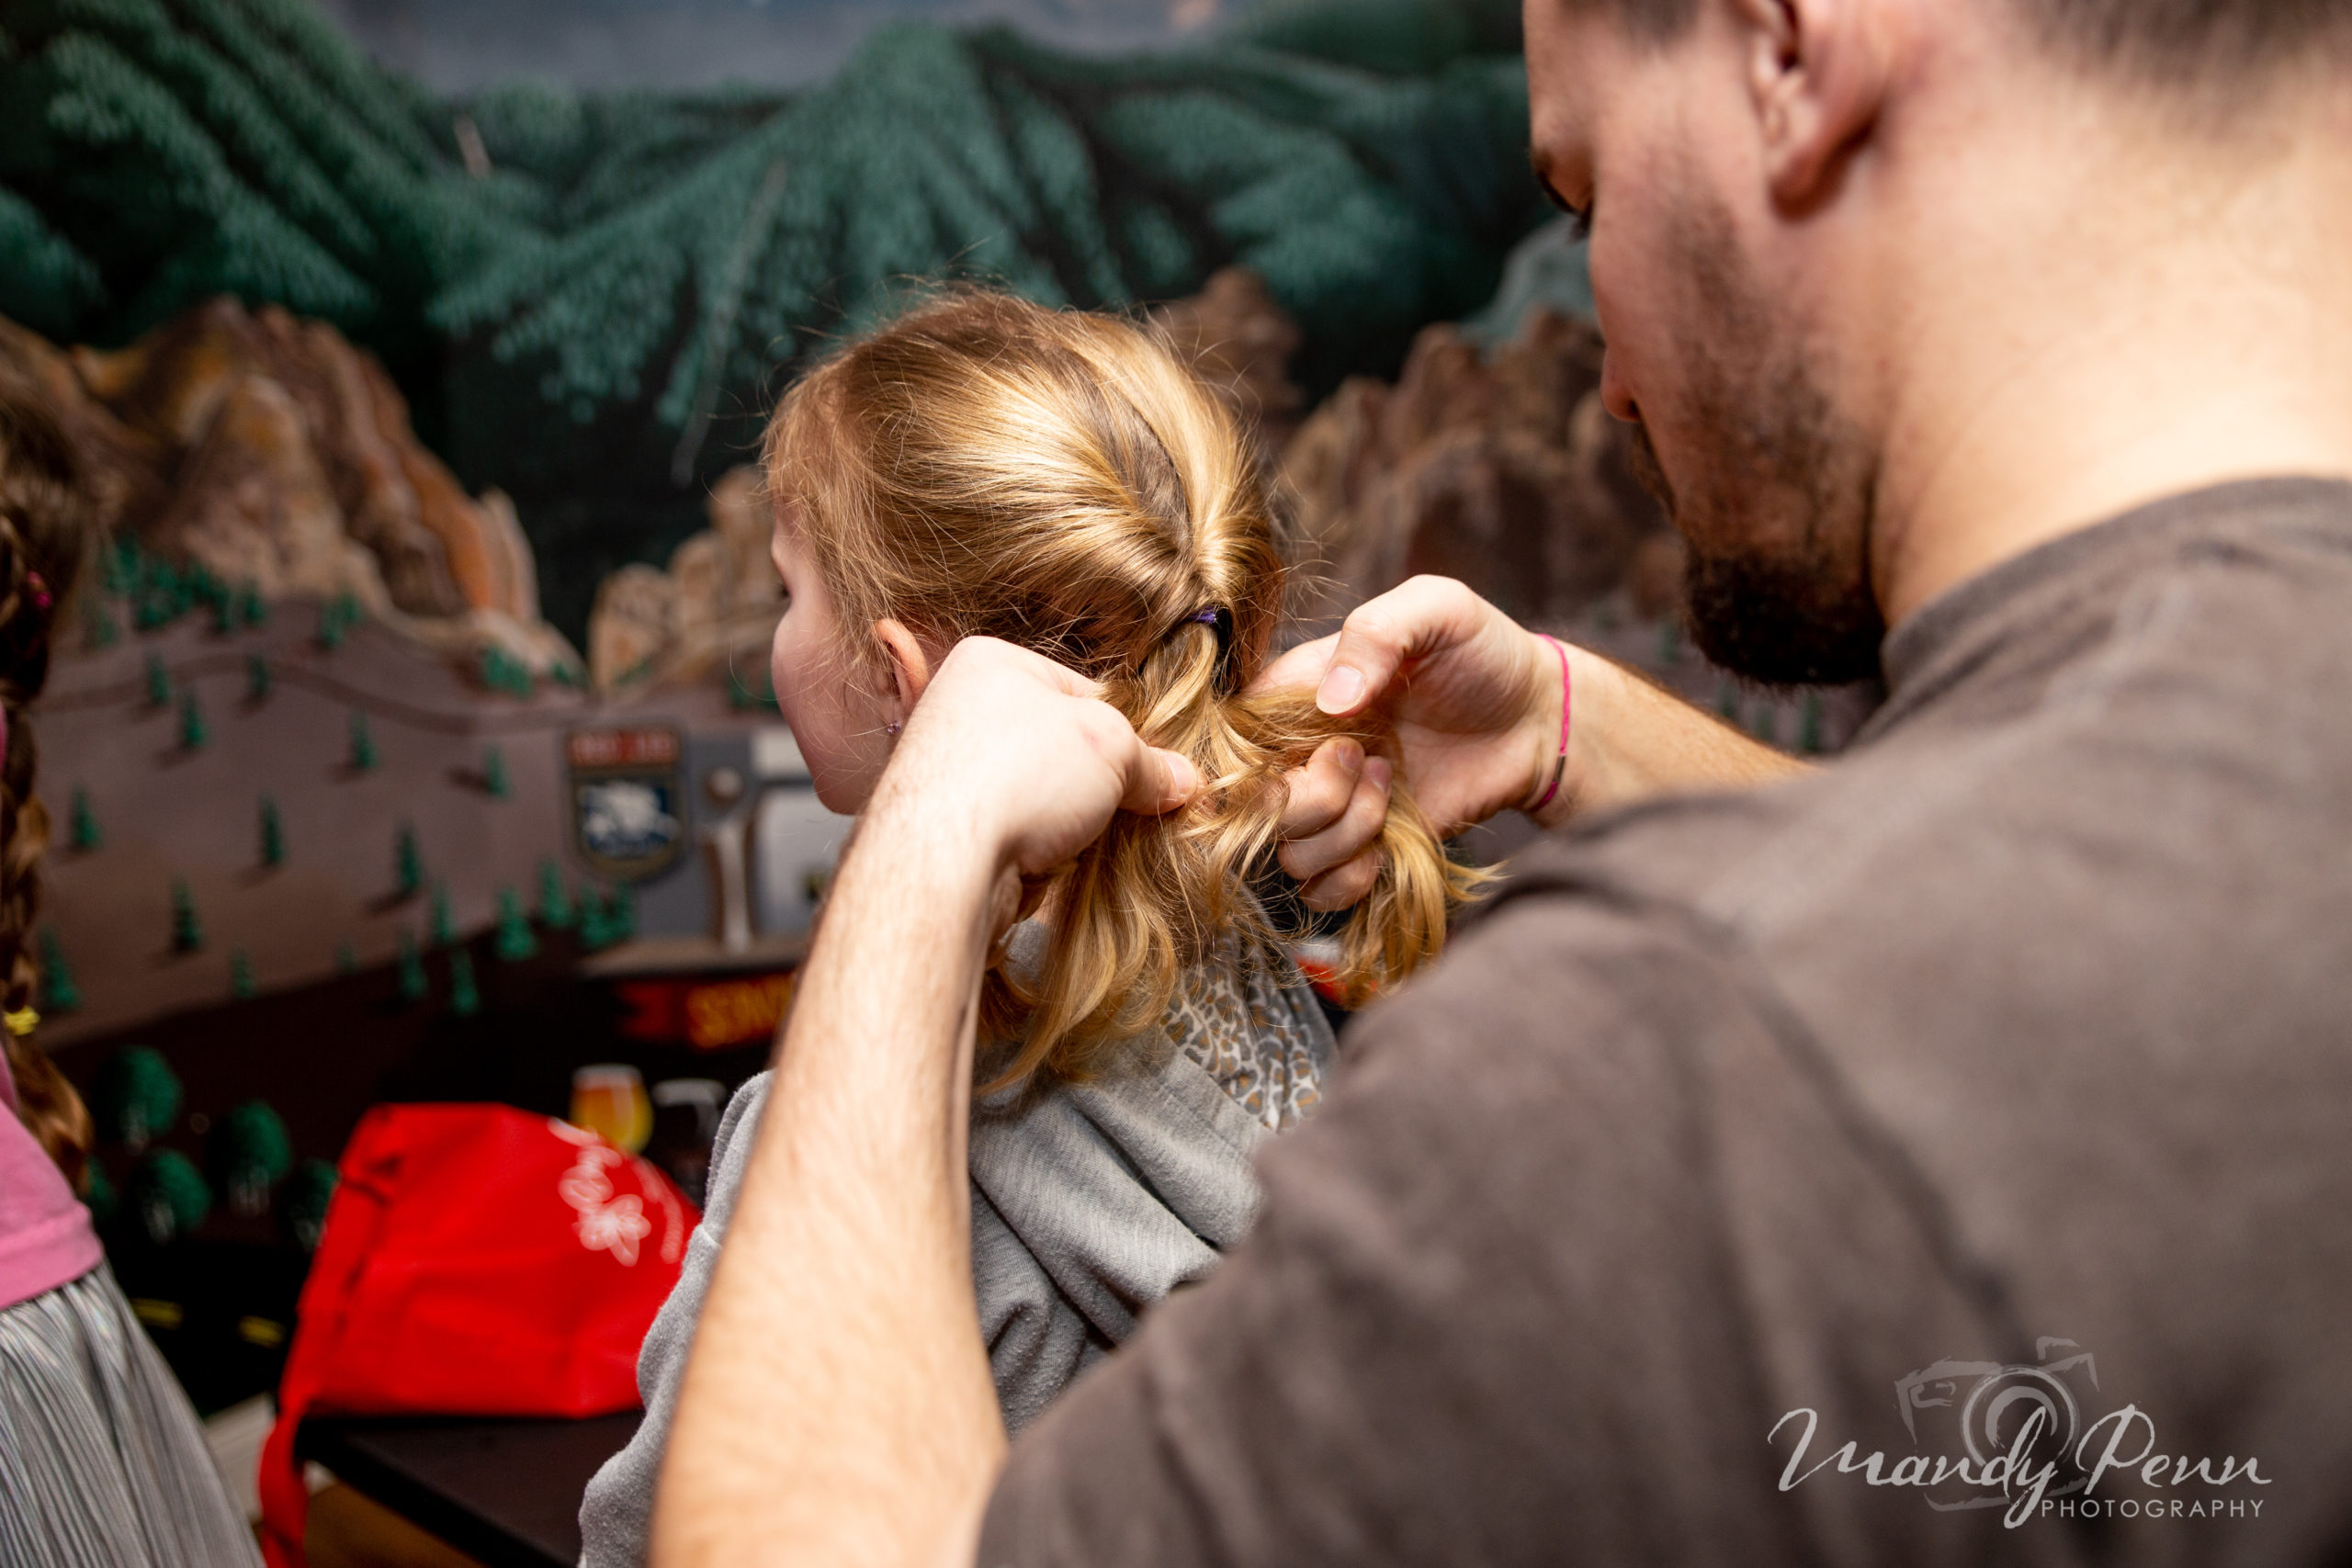 Braids and Brews hosted by Redleg Brewing Company and Day Lily Salon and Spa 2020